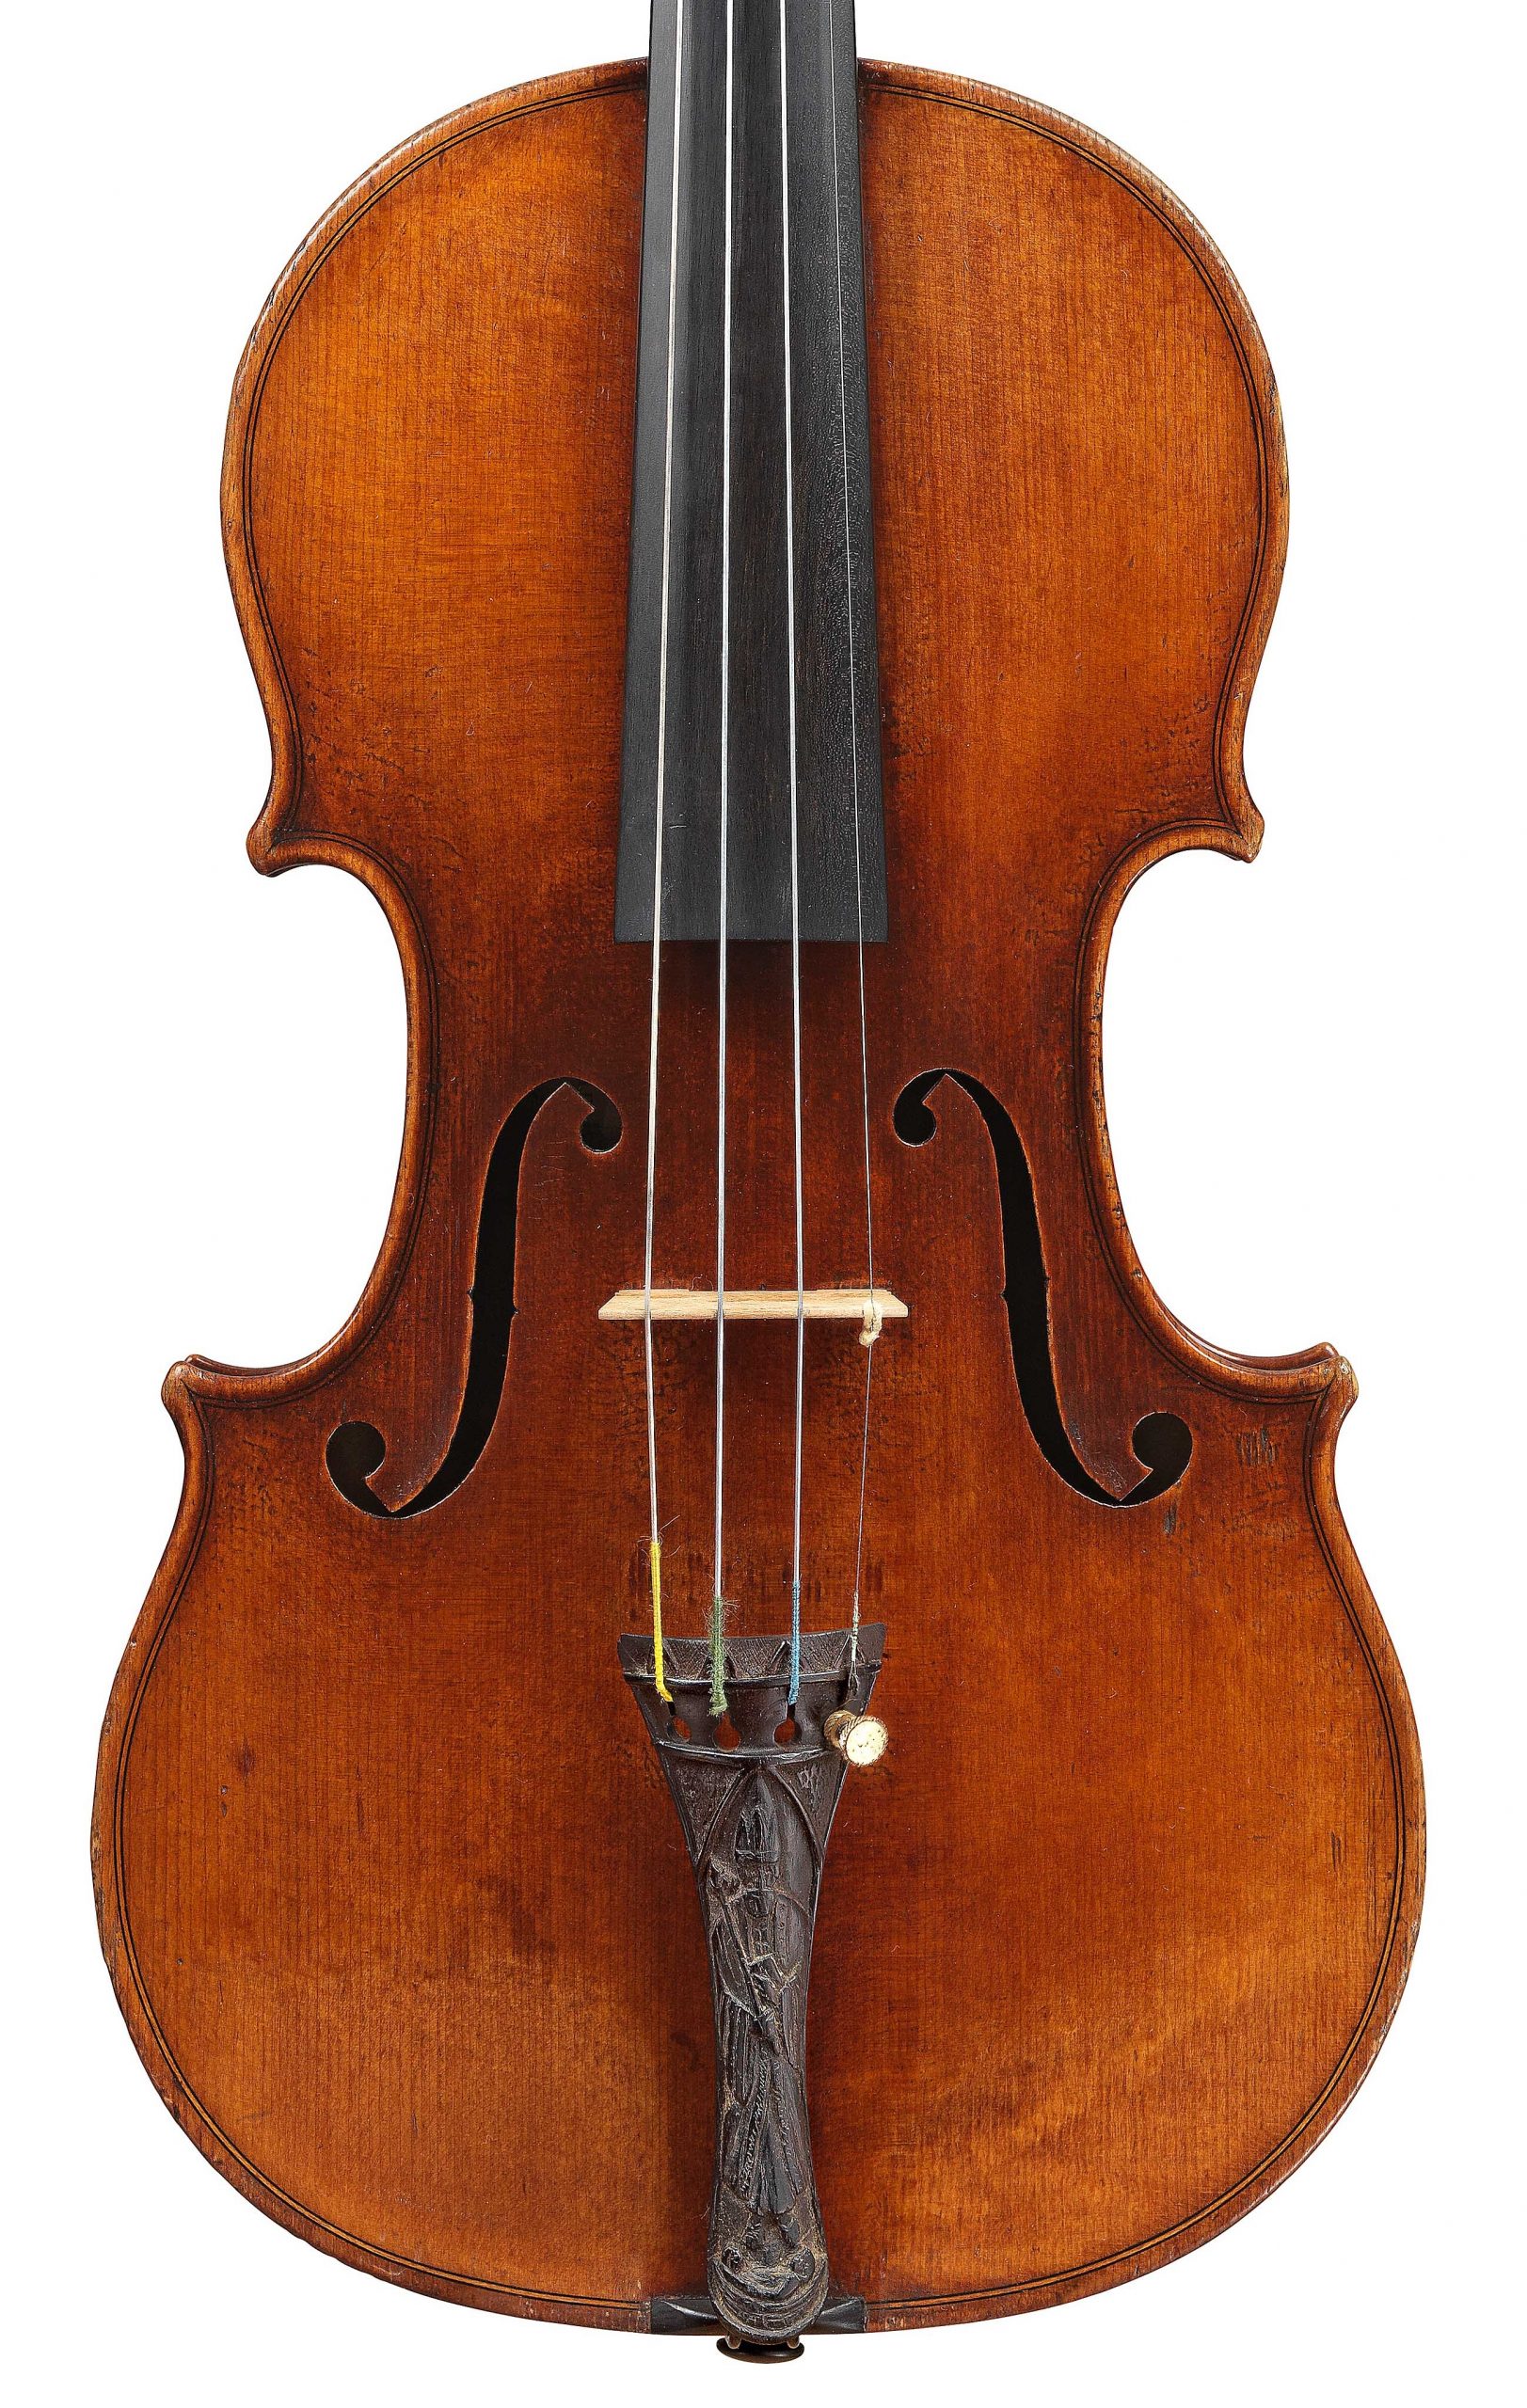 The front of the St. Nicholas Vuillaume violin, dated 1872